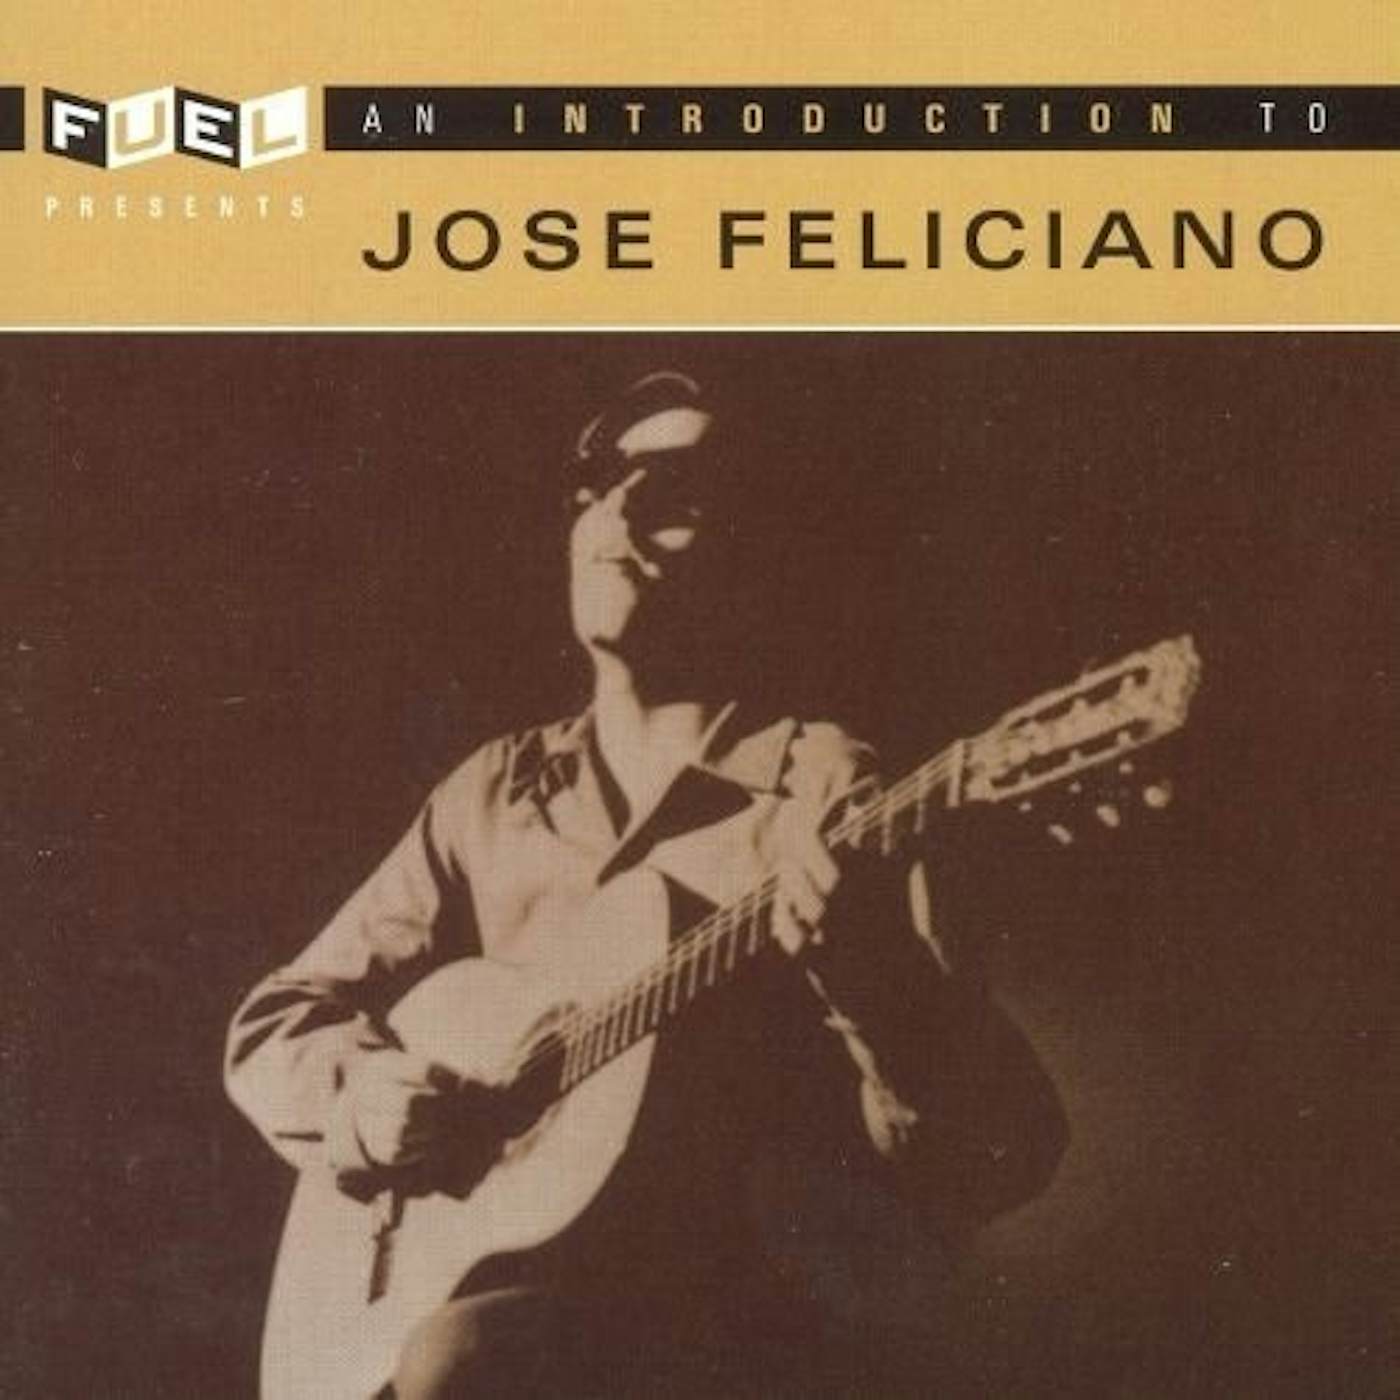 José Feliciano AN INTRODUCTION TO CD